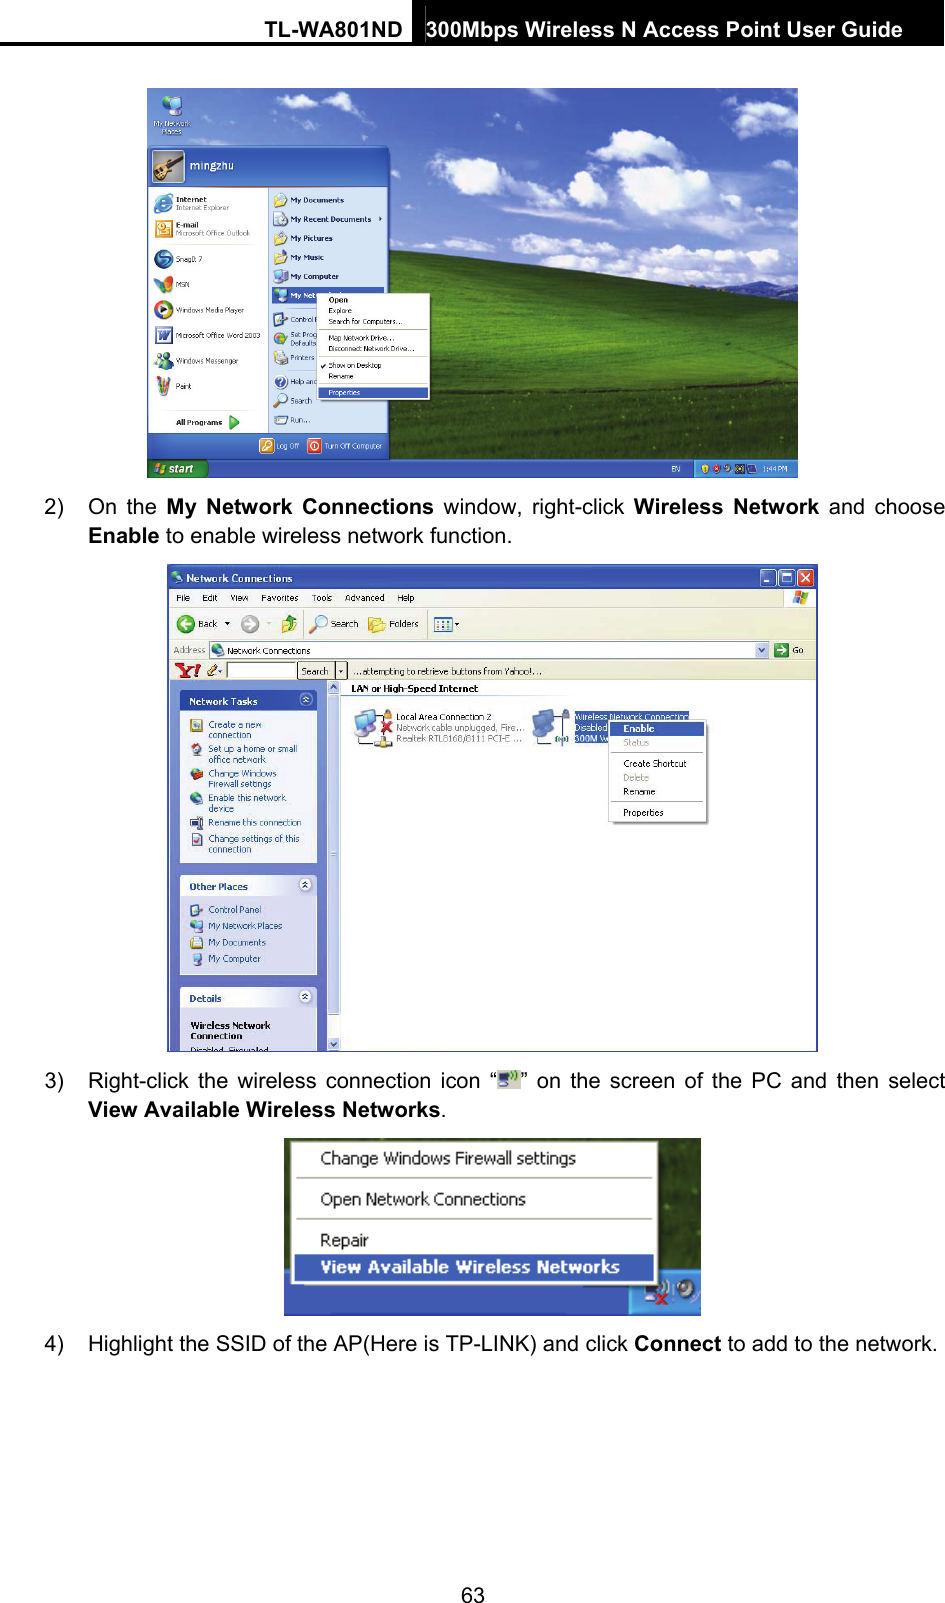 TL-WA801ND 300Mbps Wireless N Access Point User Guide  63  2) On the My Network Connections window, right-click Wireless Network and choose Enable to enable wireless network function.  3)  Right-click the wireless connection icon “ ” on the screen of the PC and then select View Available Wireless Networks.  4)  Highlight the SSID of the AP(Here is TP-LINK) and click Connect to add to the network. 